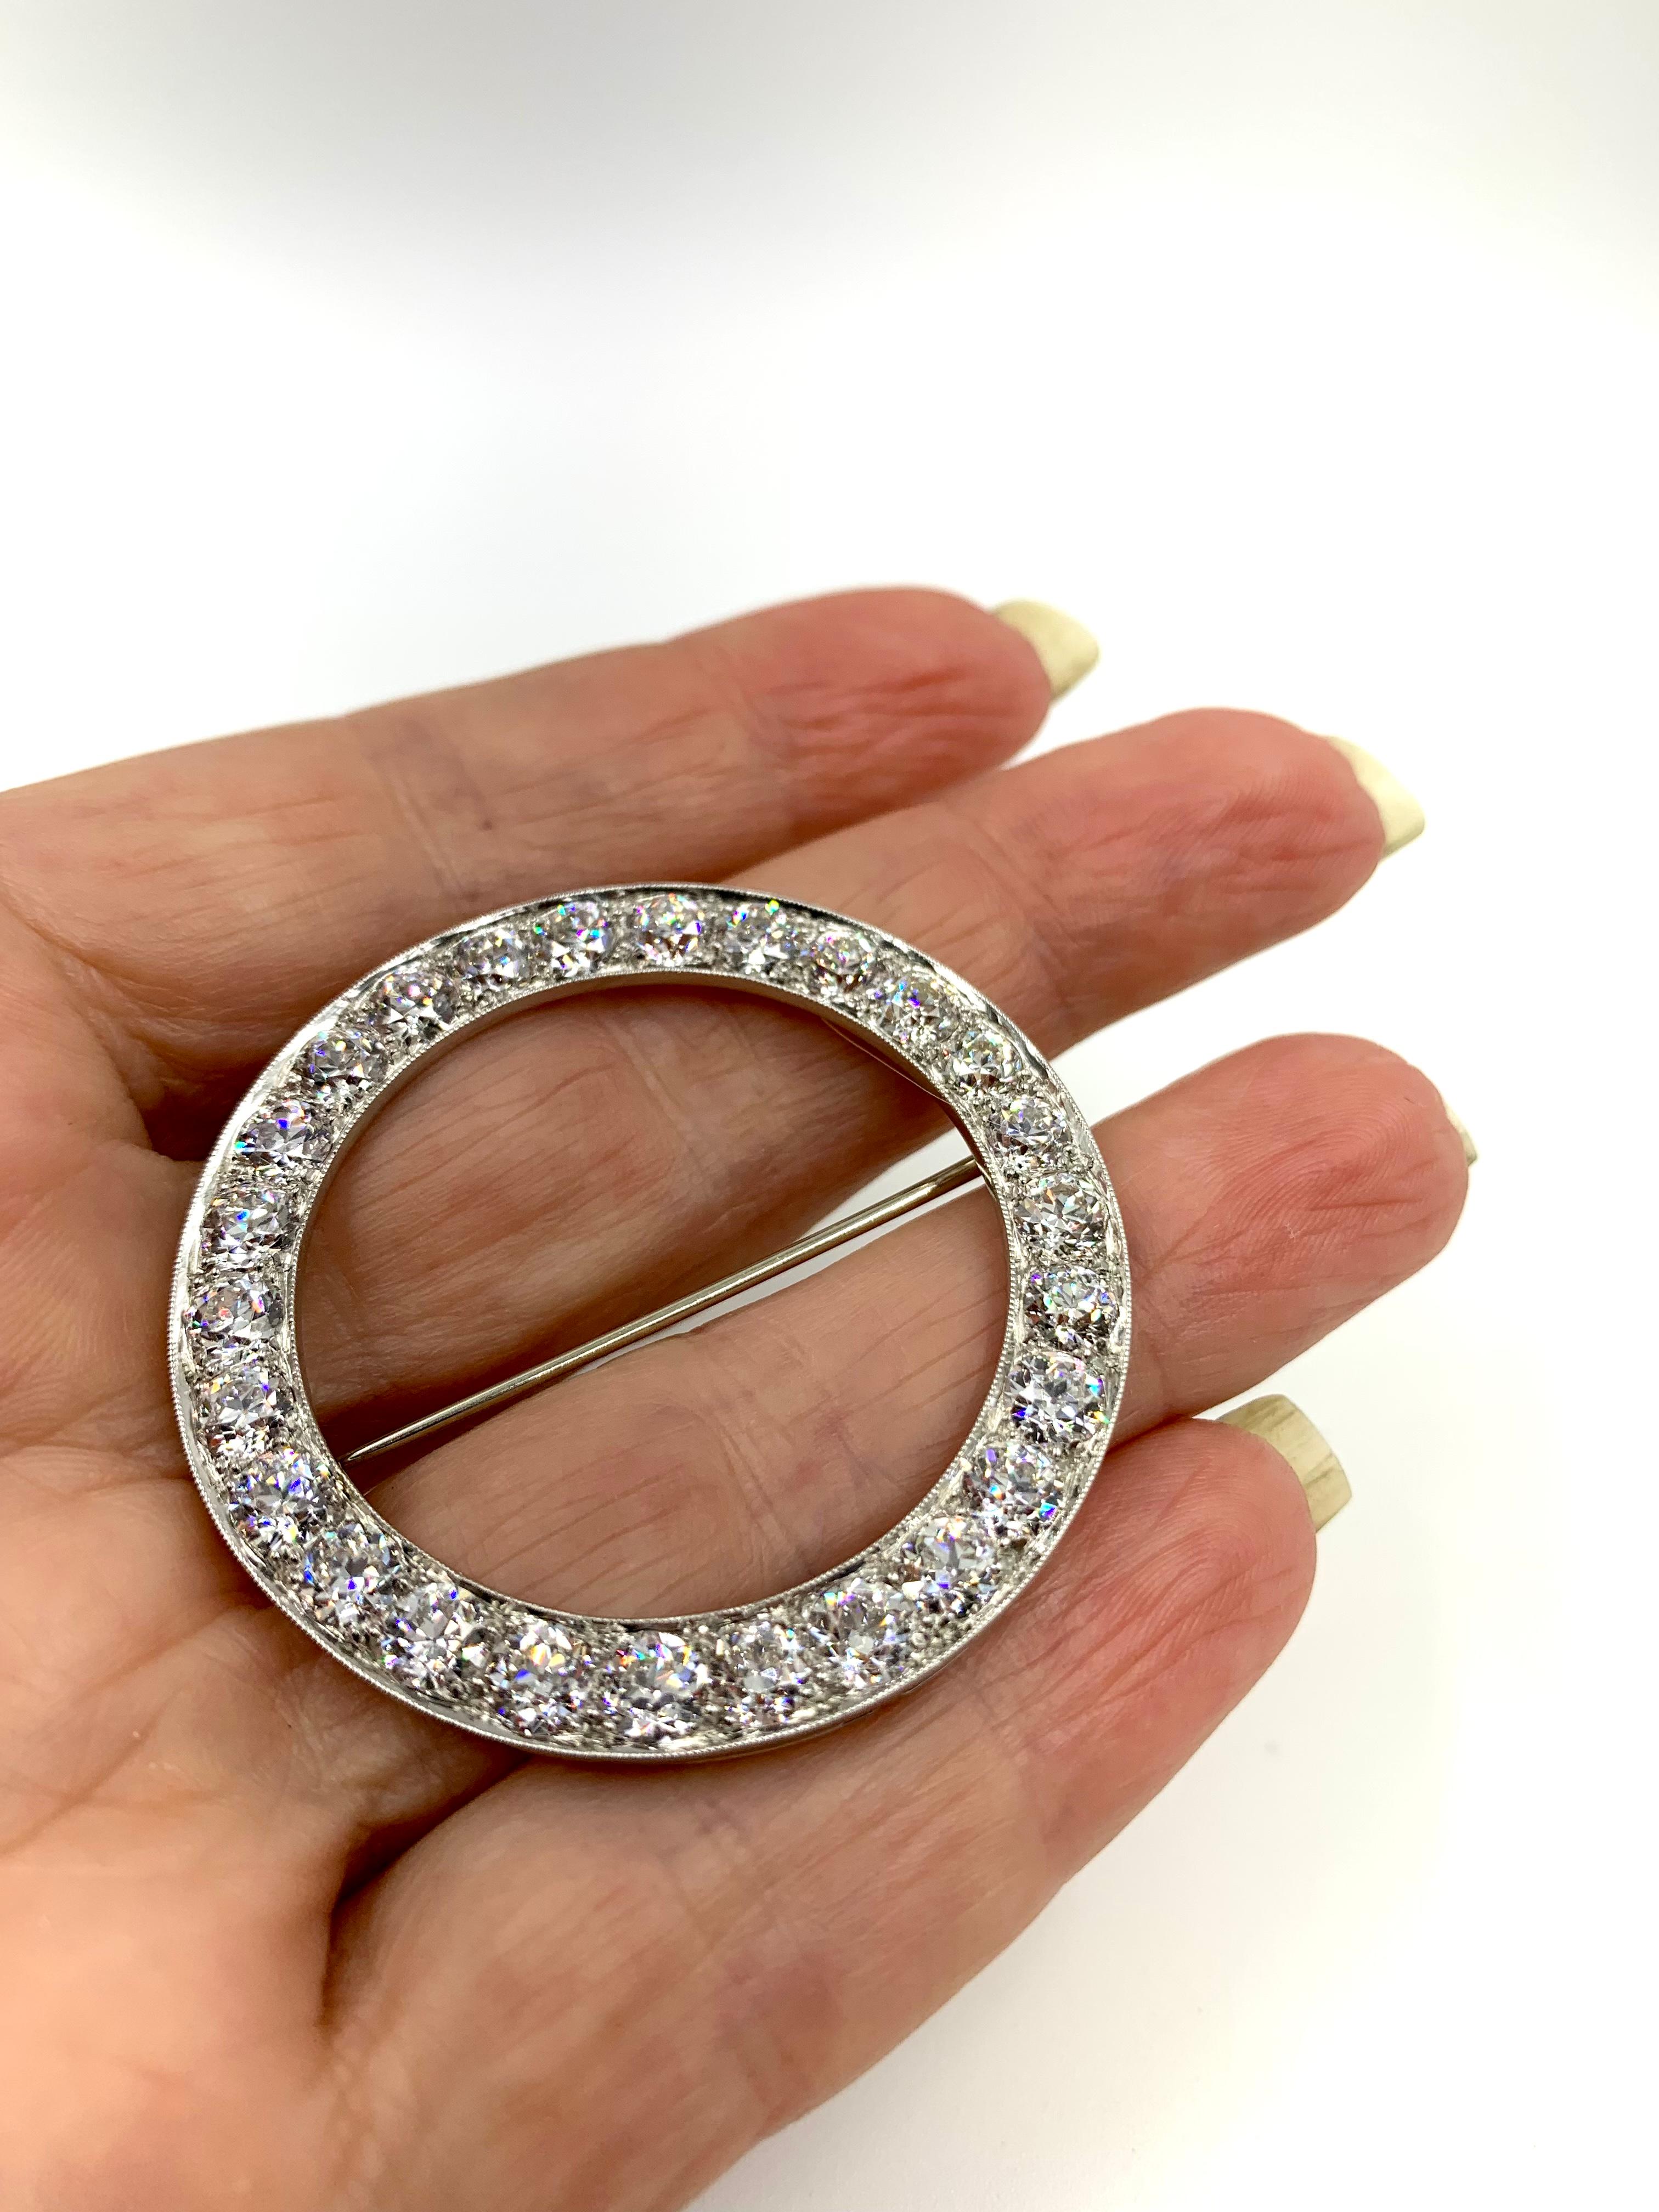 There are circle brooches and then there are spectacular circle brooches- this one is the latter. 
Superb quality, composed of 26 excellent quality Old European cut diamonds for a total of 8.45 carats, F-G color, VVS1-VVS2 clarity, set in a fine